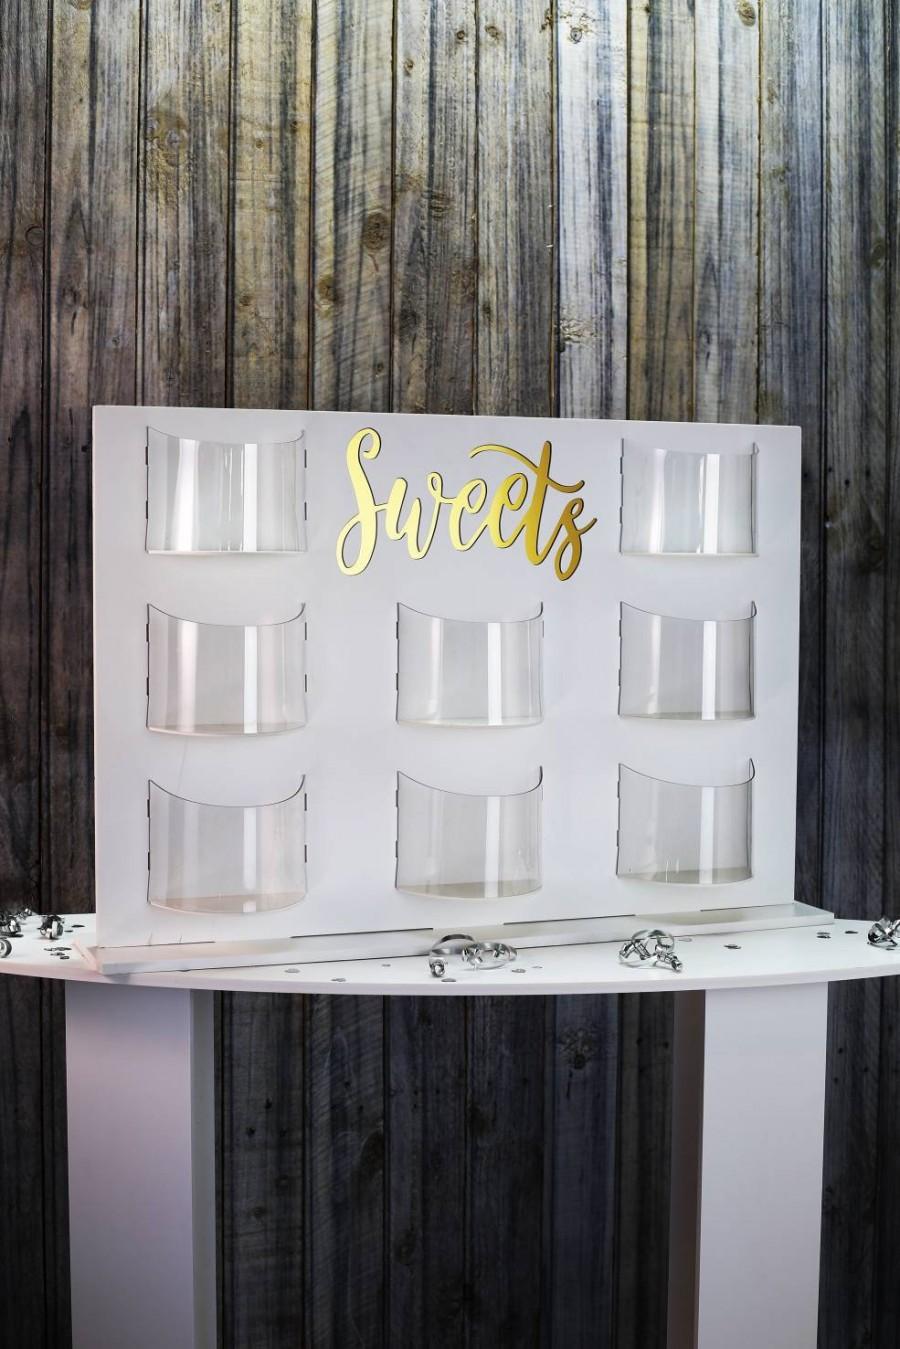 Hochzeit - Sweet Wall Candy Wall White Plastic with Gold acrylic Text Engraved Candy Cart with Clear Pockets Various Size Options . pic.SW8Freestanding